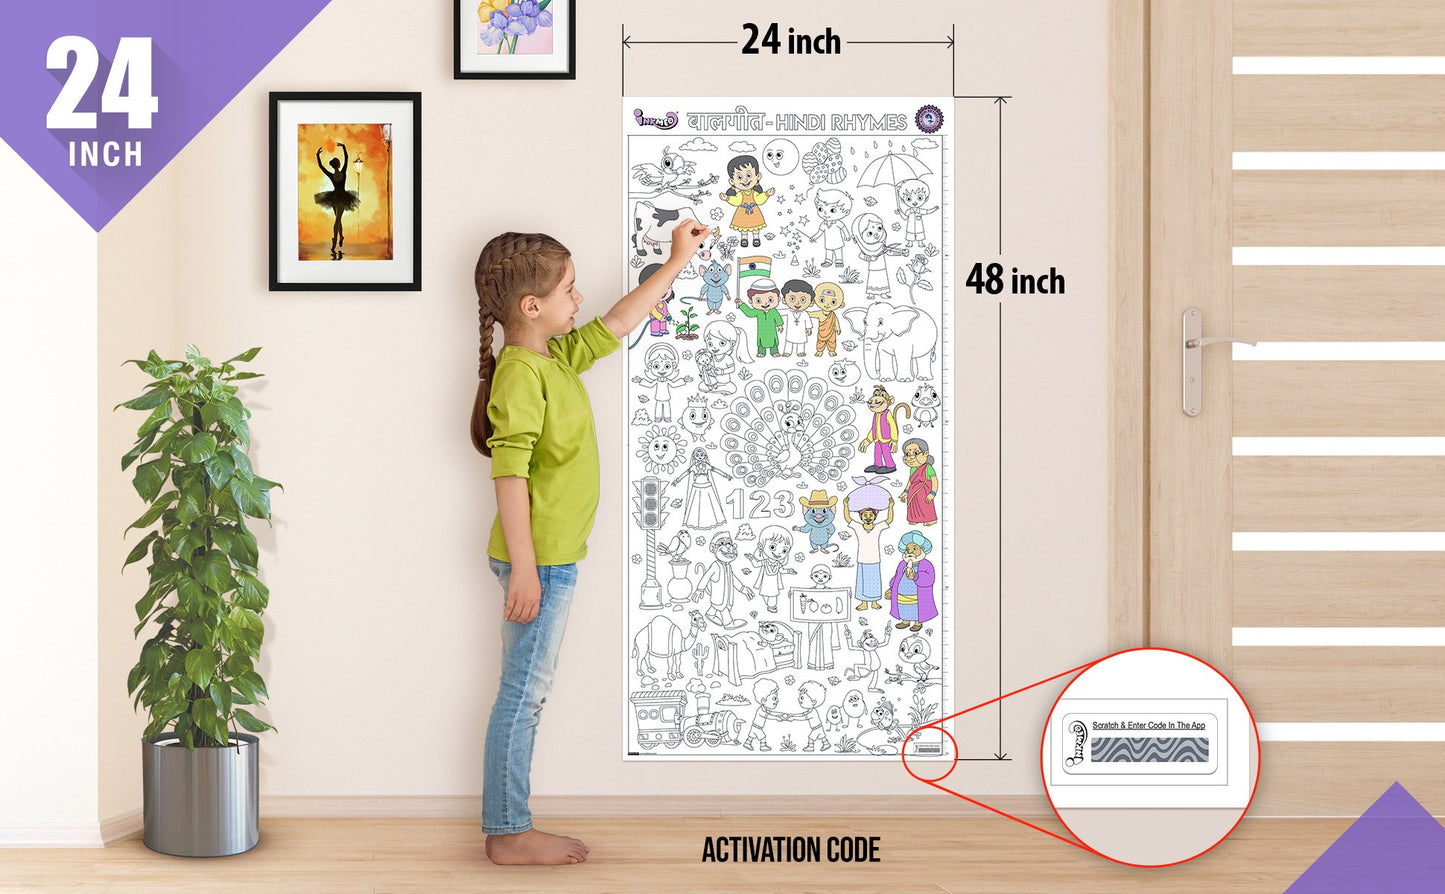 The image shows a home background with child colouring on roll sticked to the wall with size mentioned as 24*48 inches